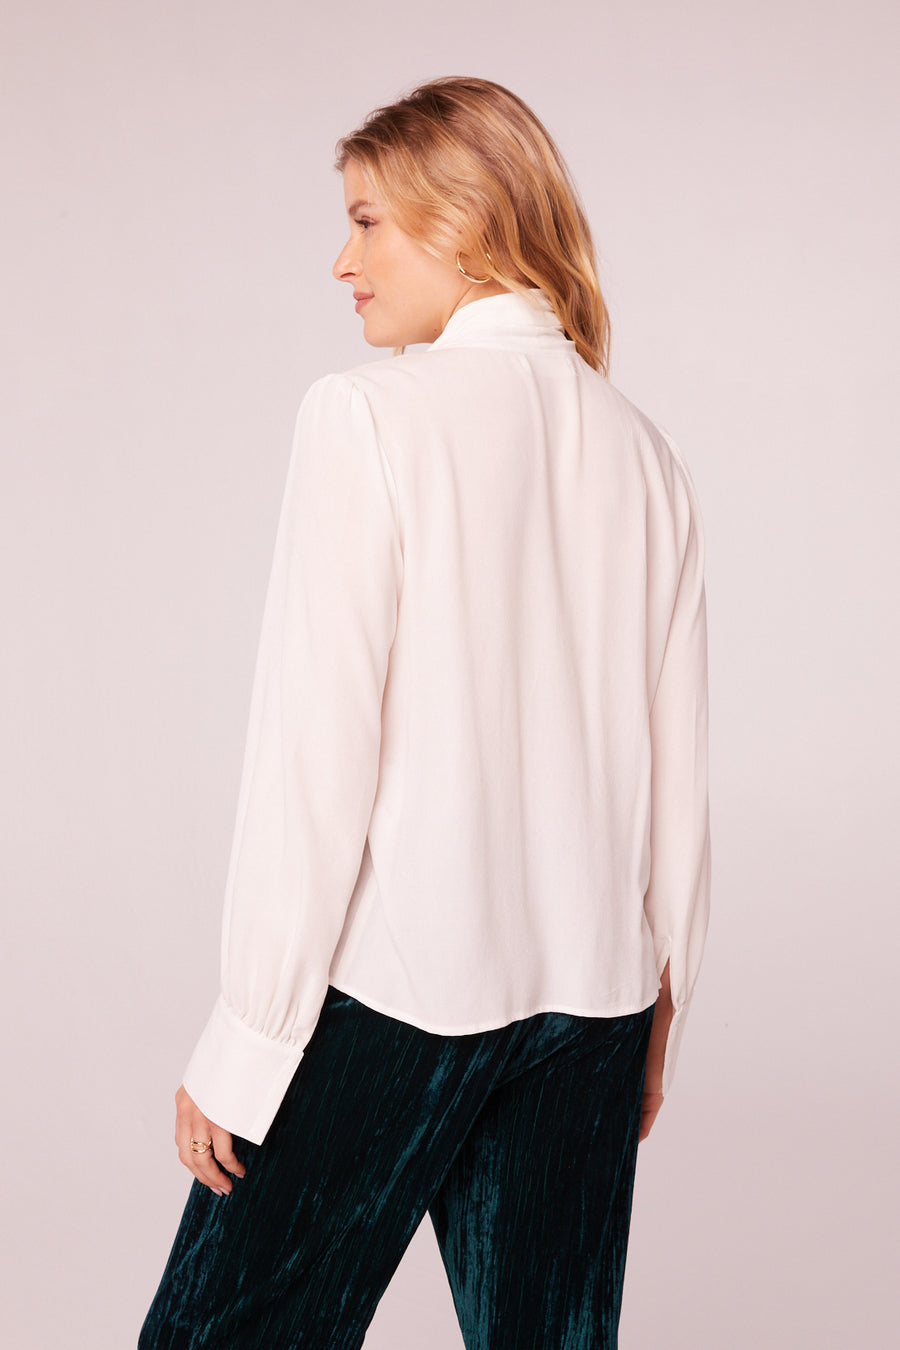 Babe Ivory Tie Neck Long Sleeve Top